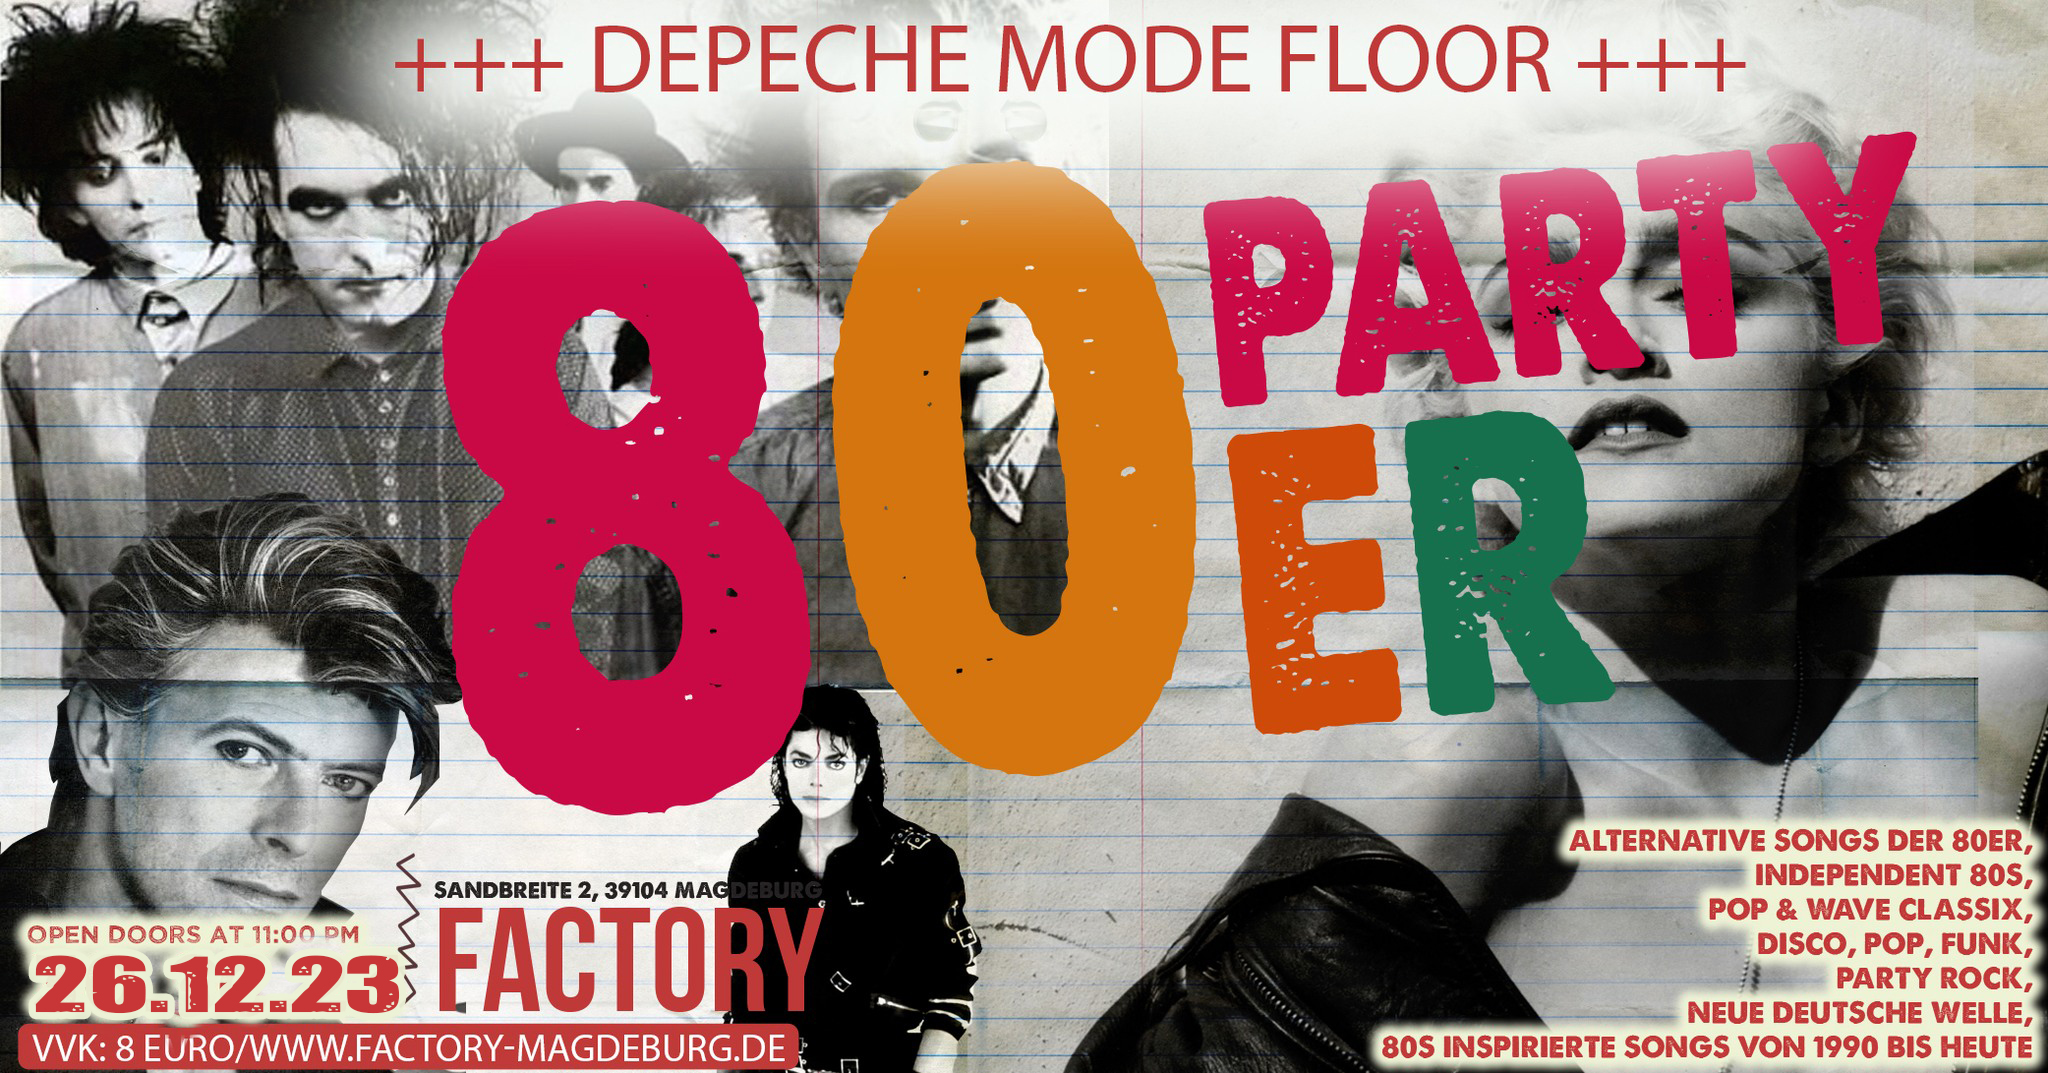 Forever Young - Die 80's Party + Depeche Mode Floor // 26.12.2023